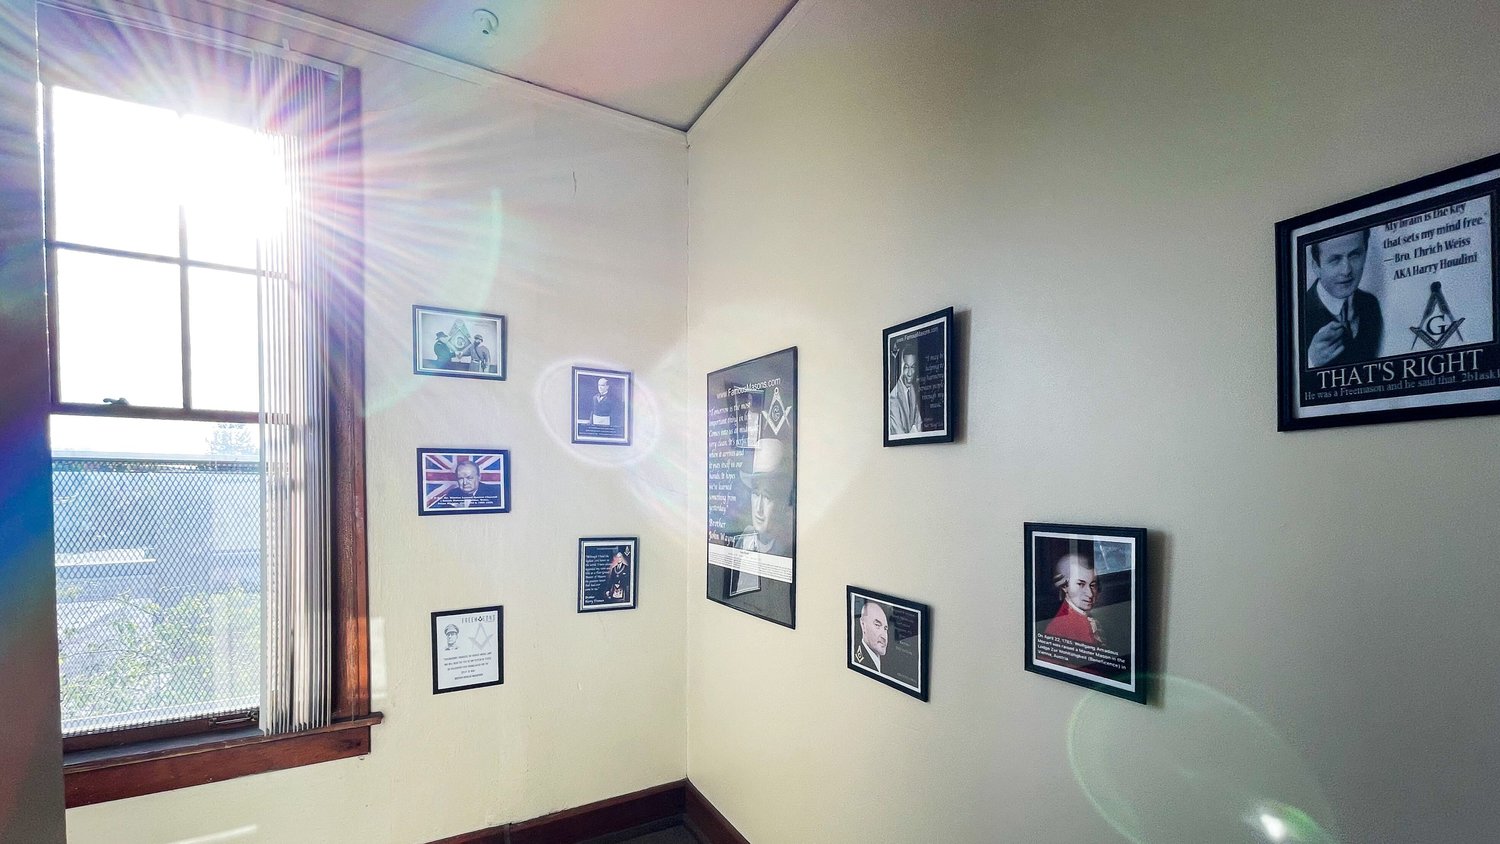 Photos and quotes hang on display inside the Masonic Temple in Centralia on Saturday.